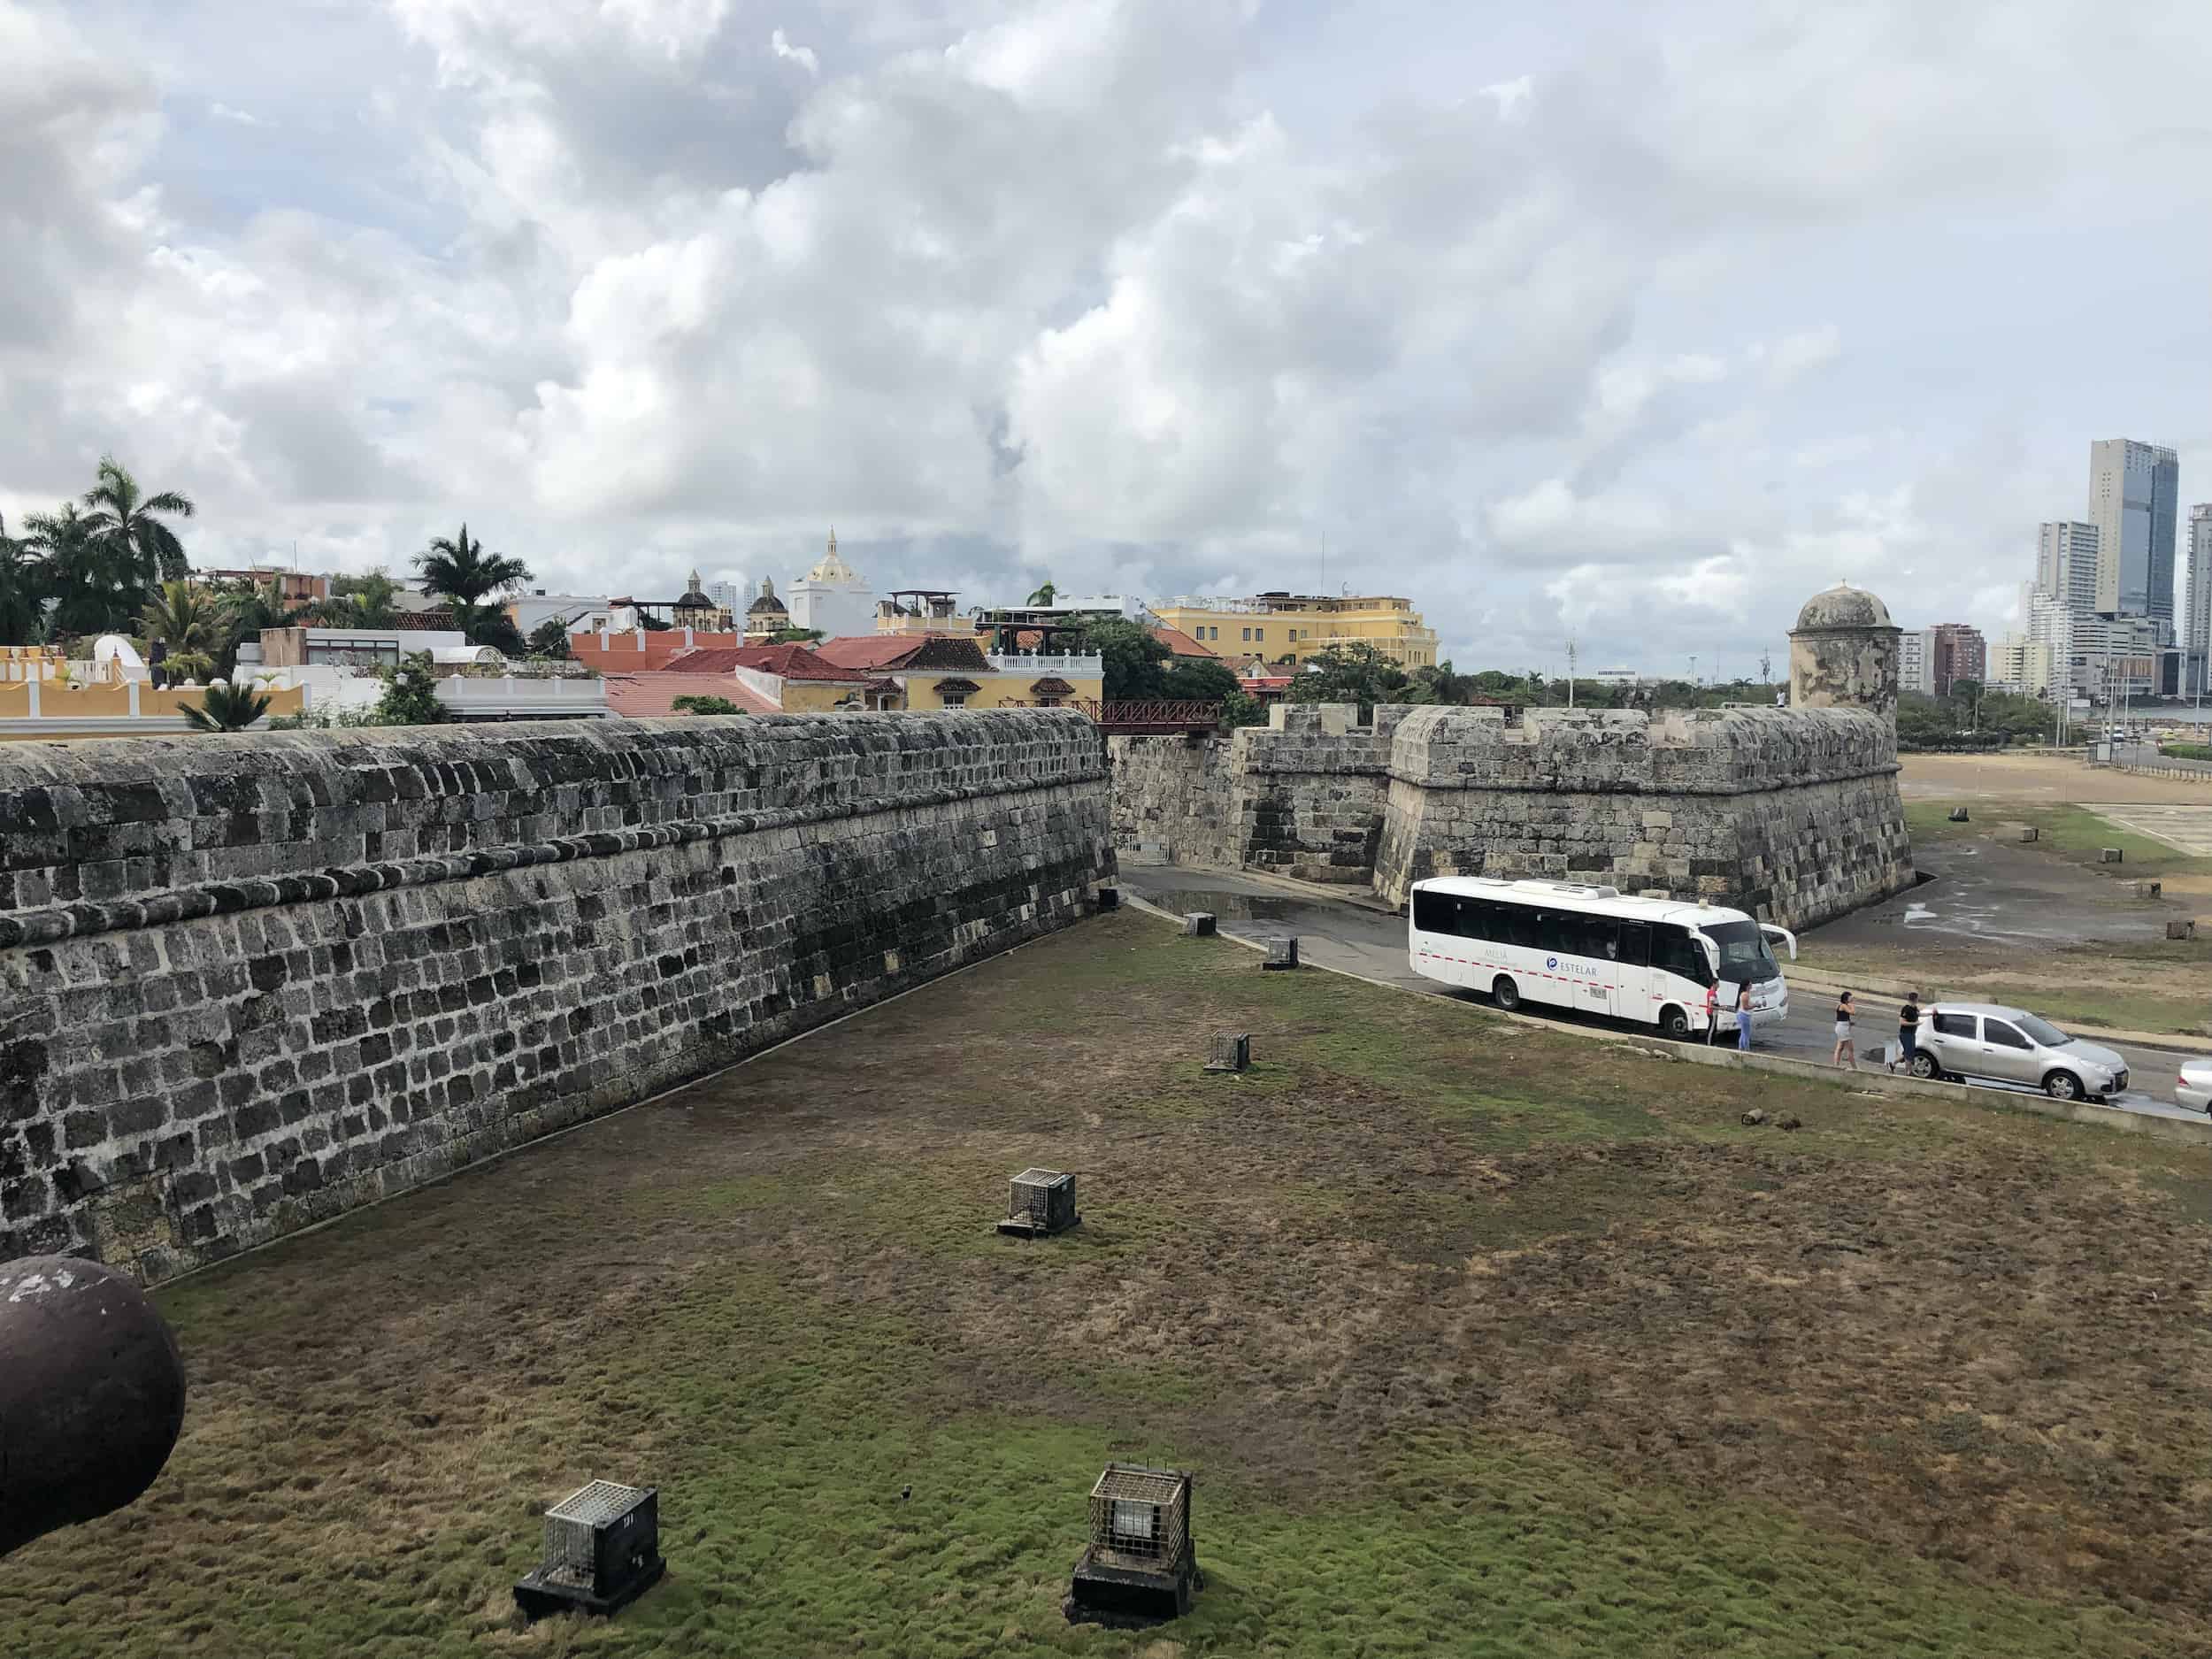 Looking towards the Bastion of Saint James on the Walls of Cartagena, Colombia